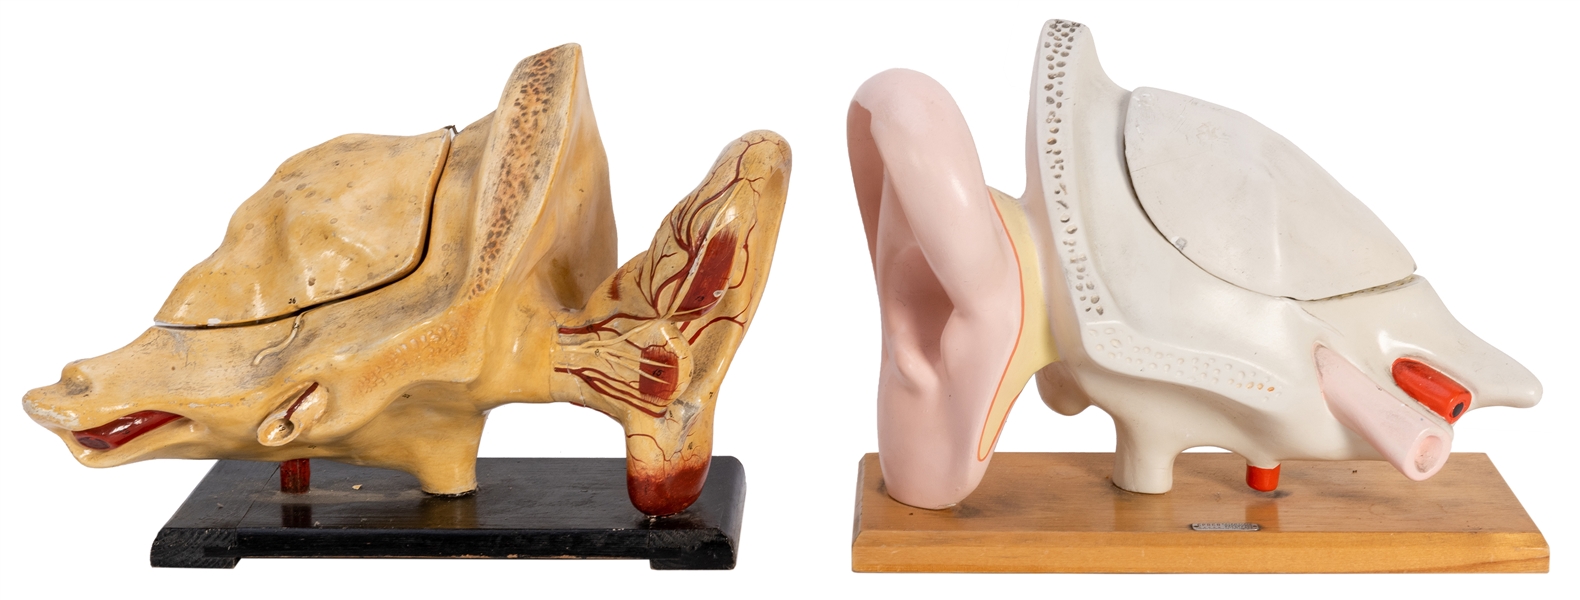 Pair of Giant Human Ear Anatomical Models for Medical Study.